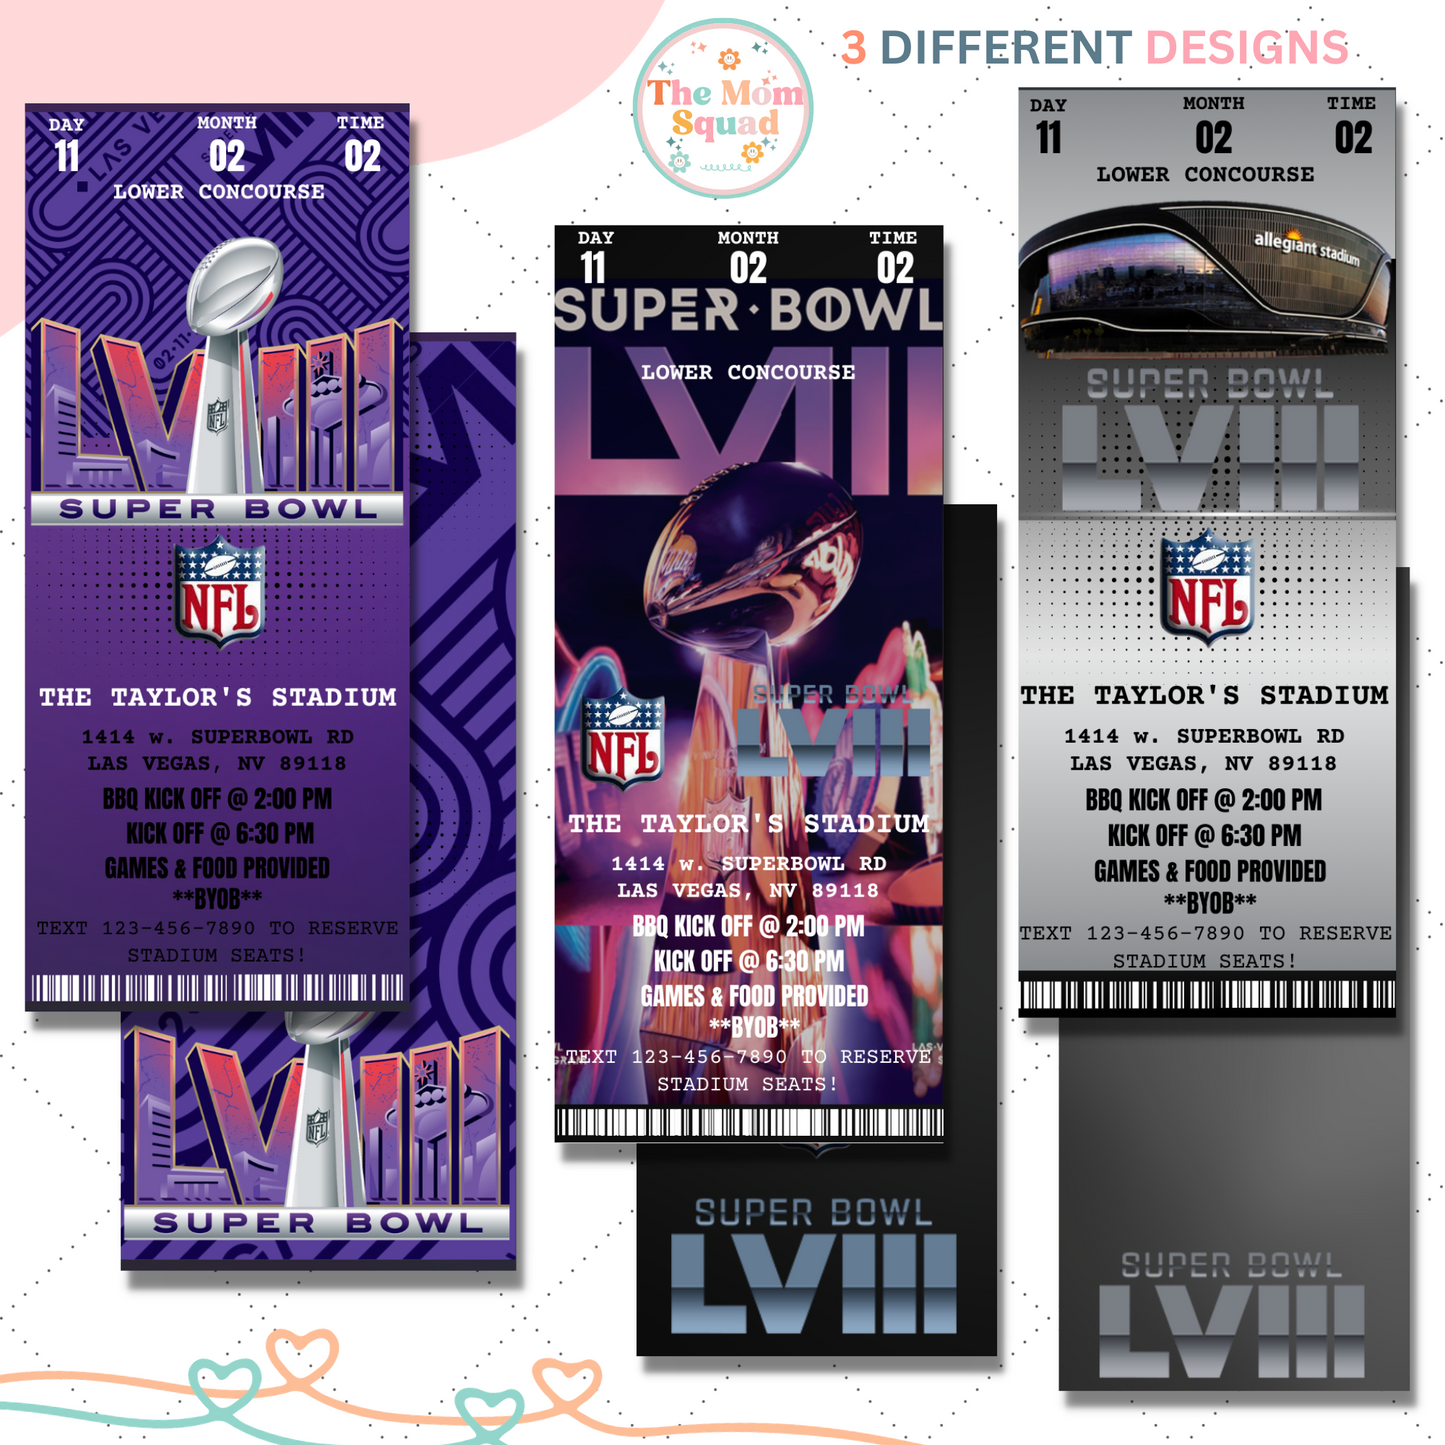 Ultimate Super Bowl Watch Party Experience: Exclusive Ticket Invitation for an Unforgettable Game Day Celebration!